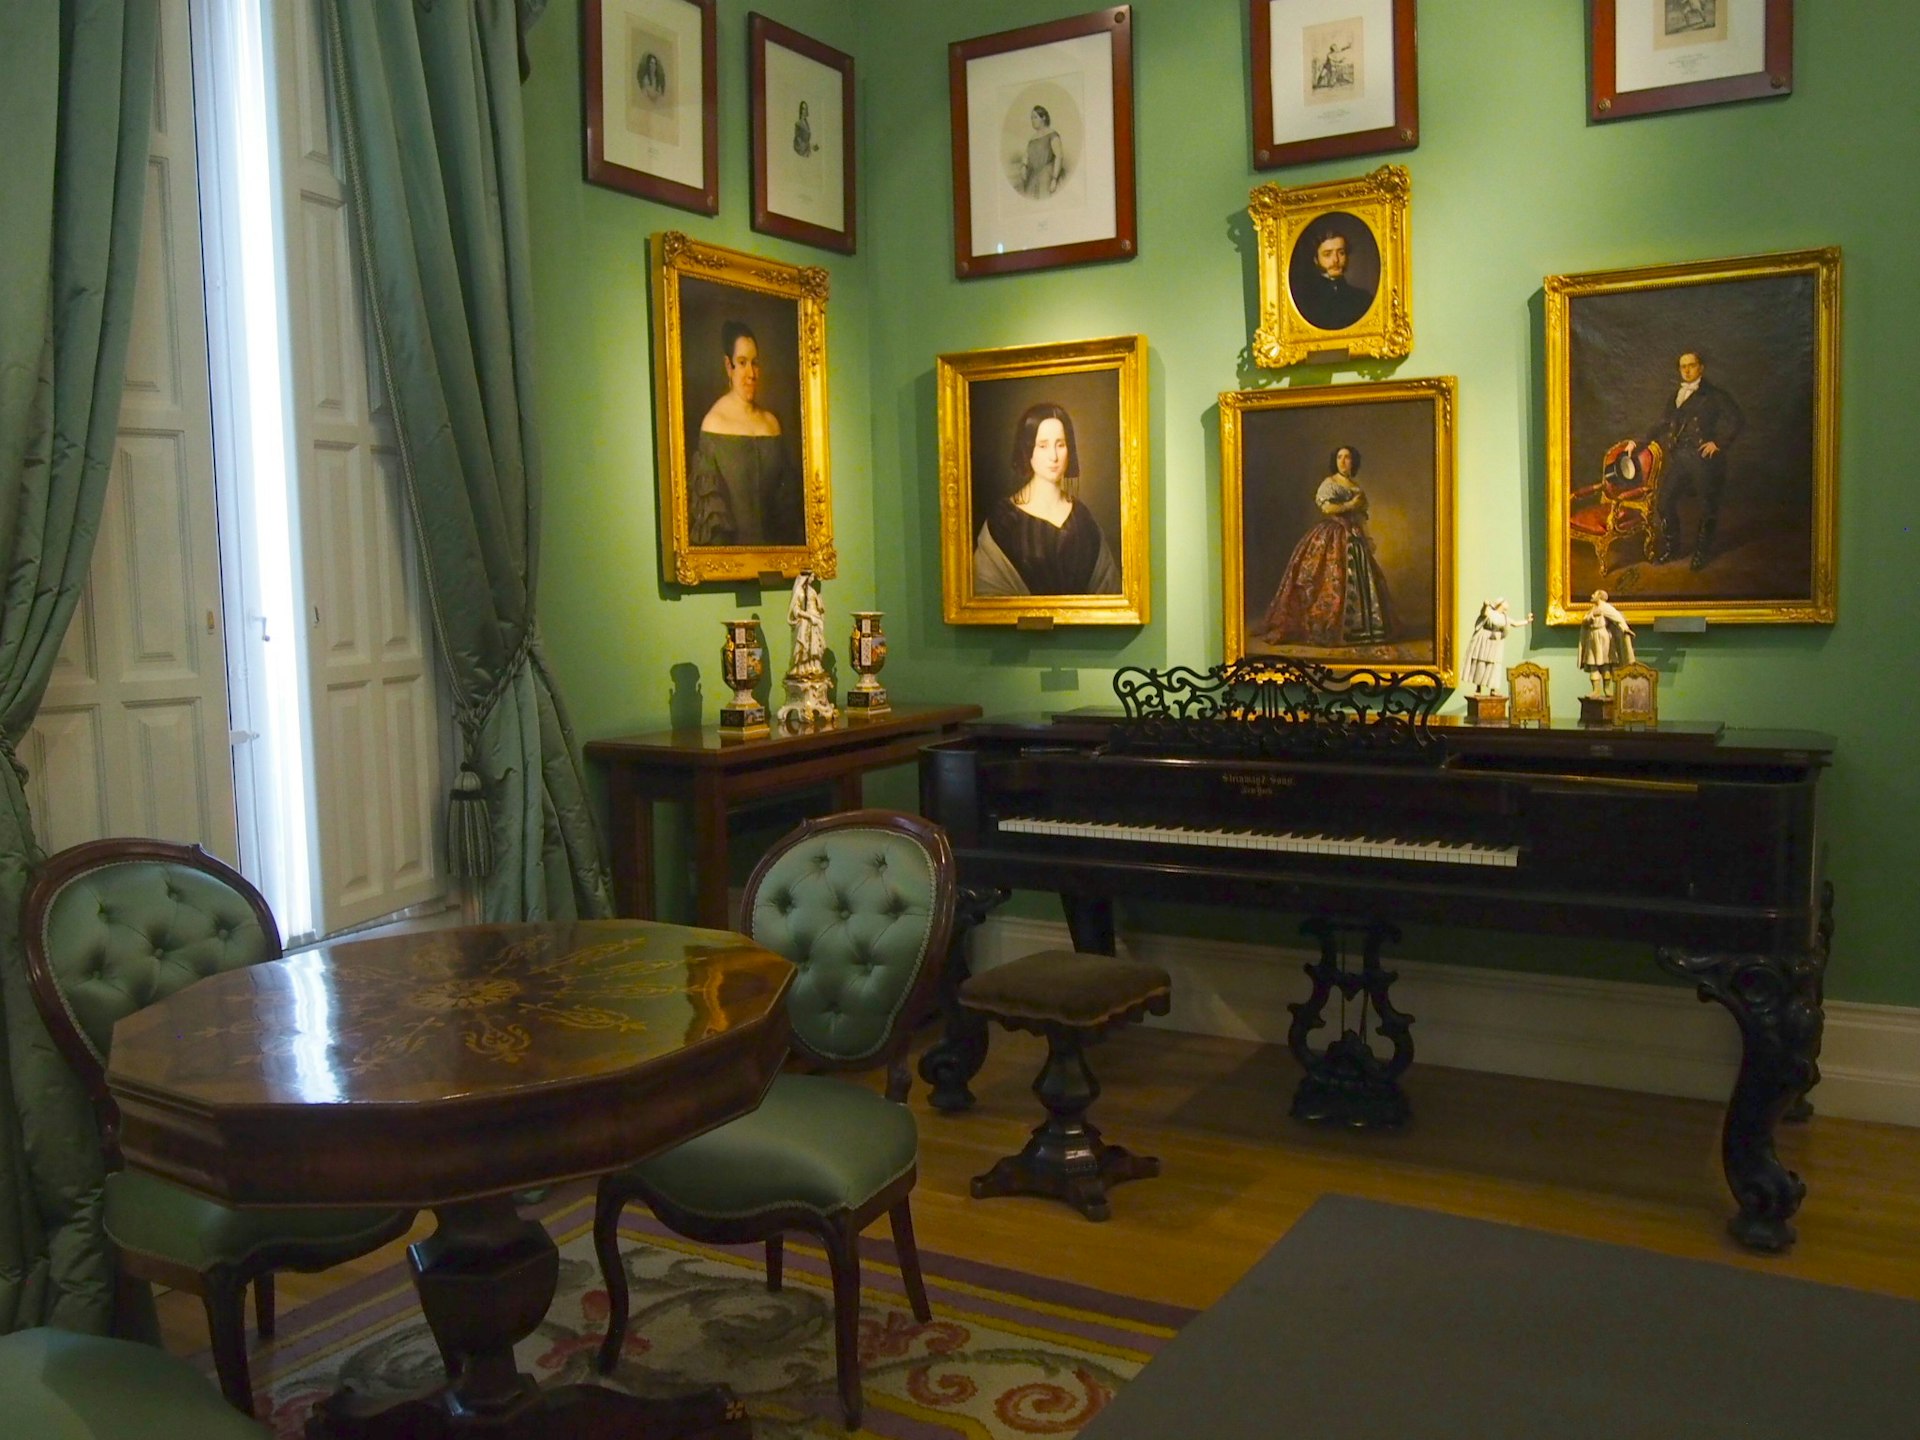 A piano sits against the wall beneath paintings at the Museo del Romanticismo, Madrid.